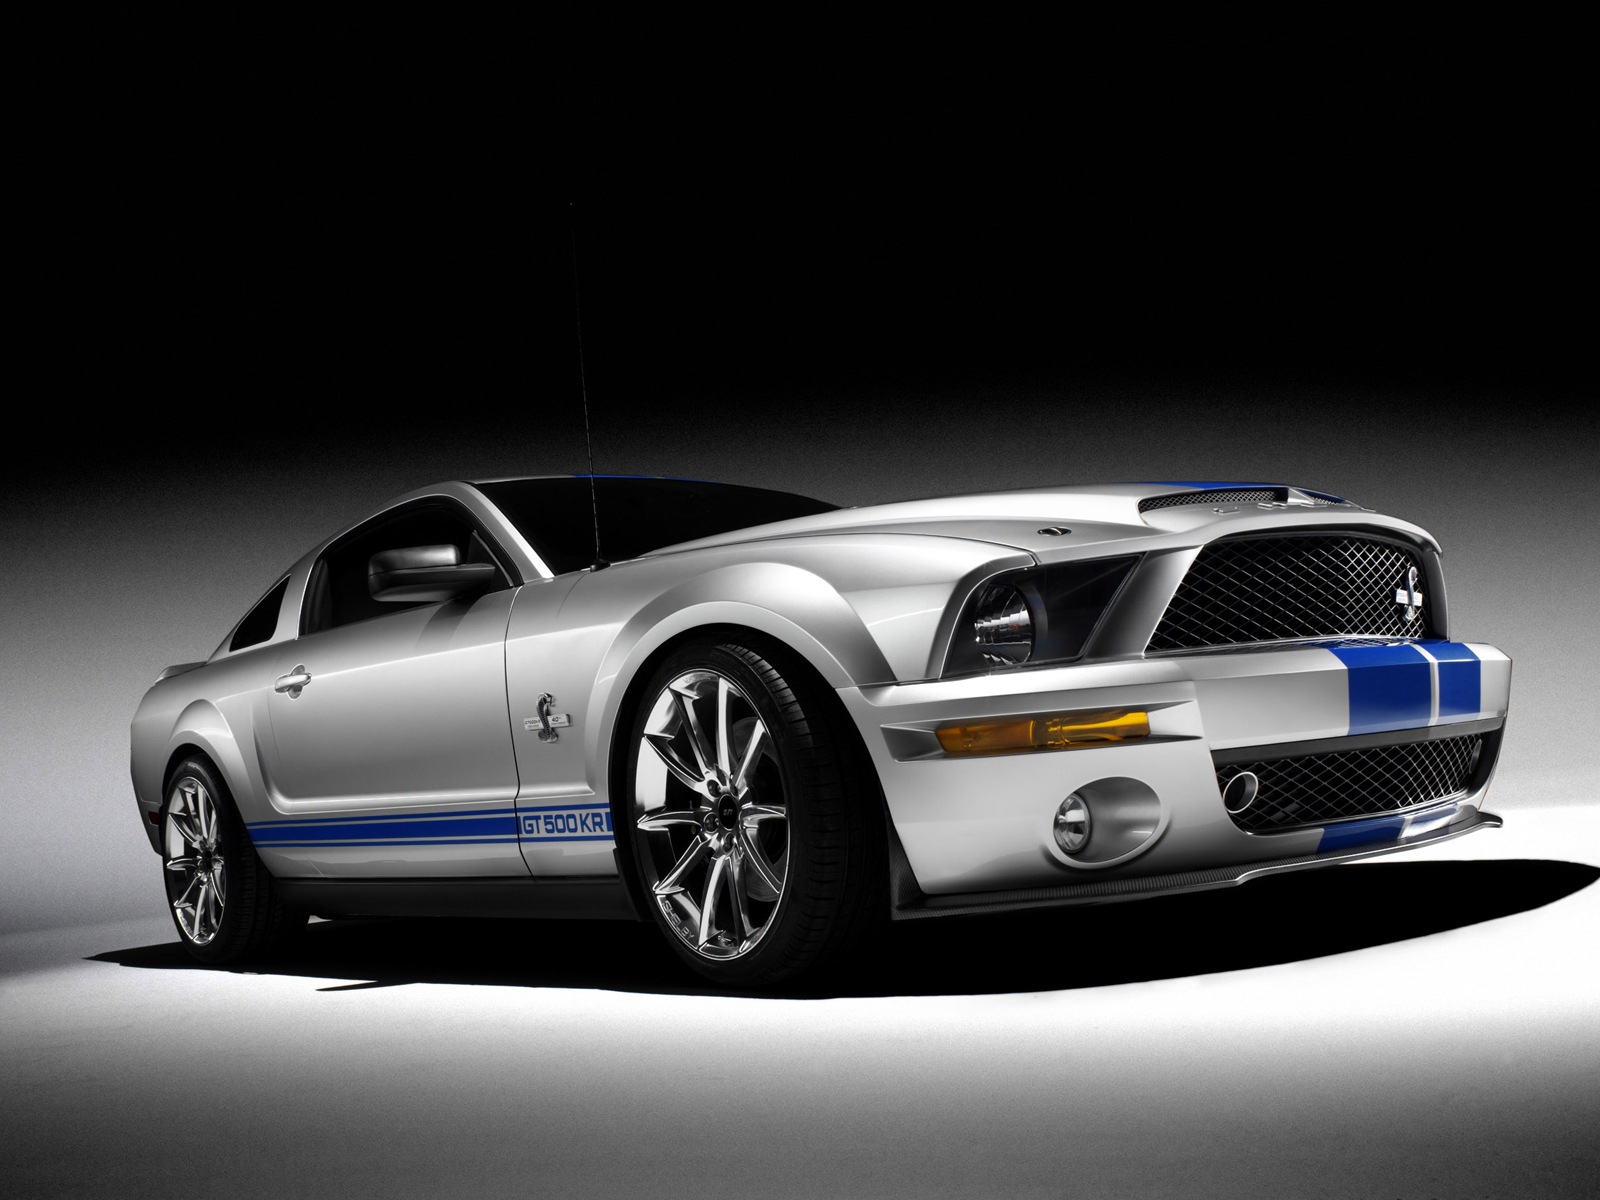 Ford Shelby Mustang GT500KR Wallpapers | 1600x1200